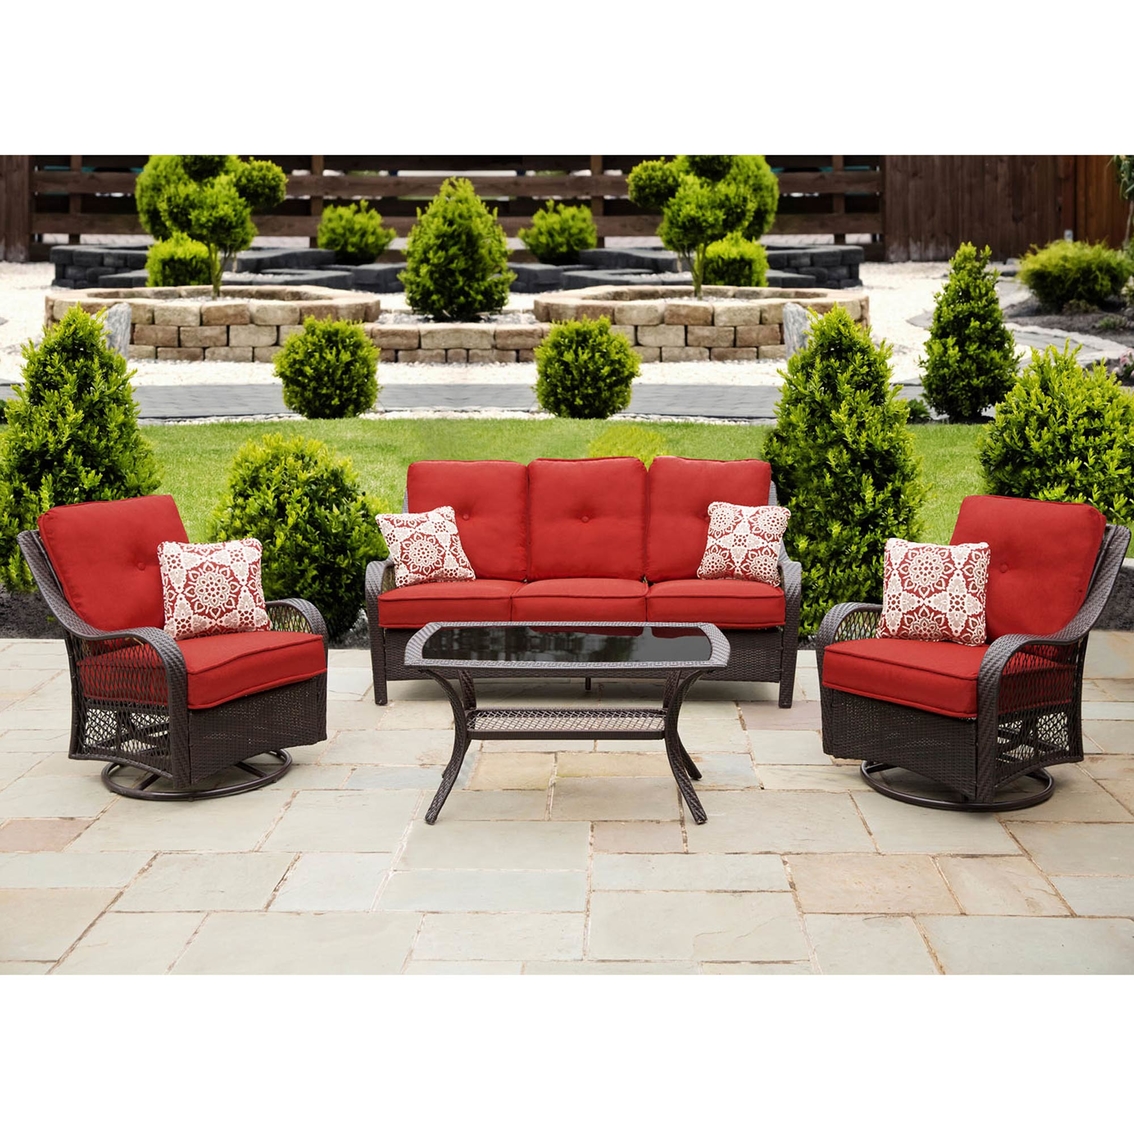 Hanover Orleans 4 pc. All Weather Patio Set - Image 4 of 4